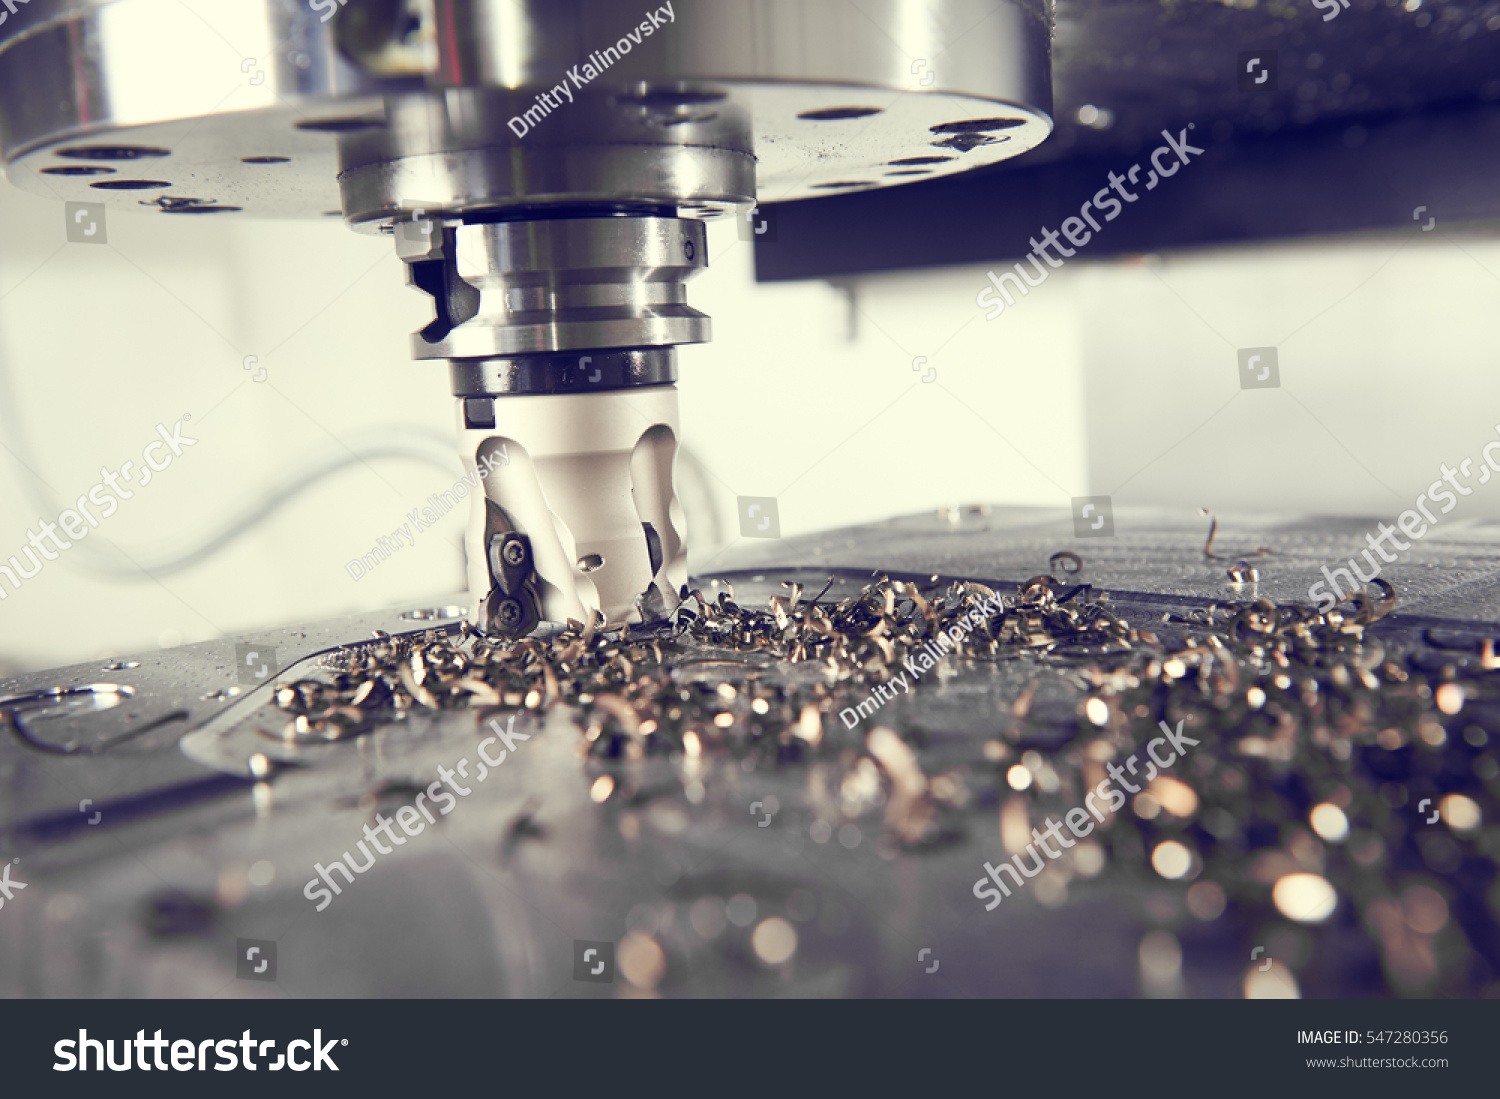 industrial metalworking cutting process by milling cutter #547280356